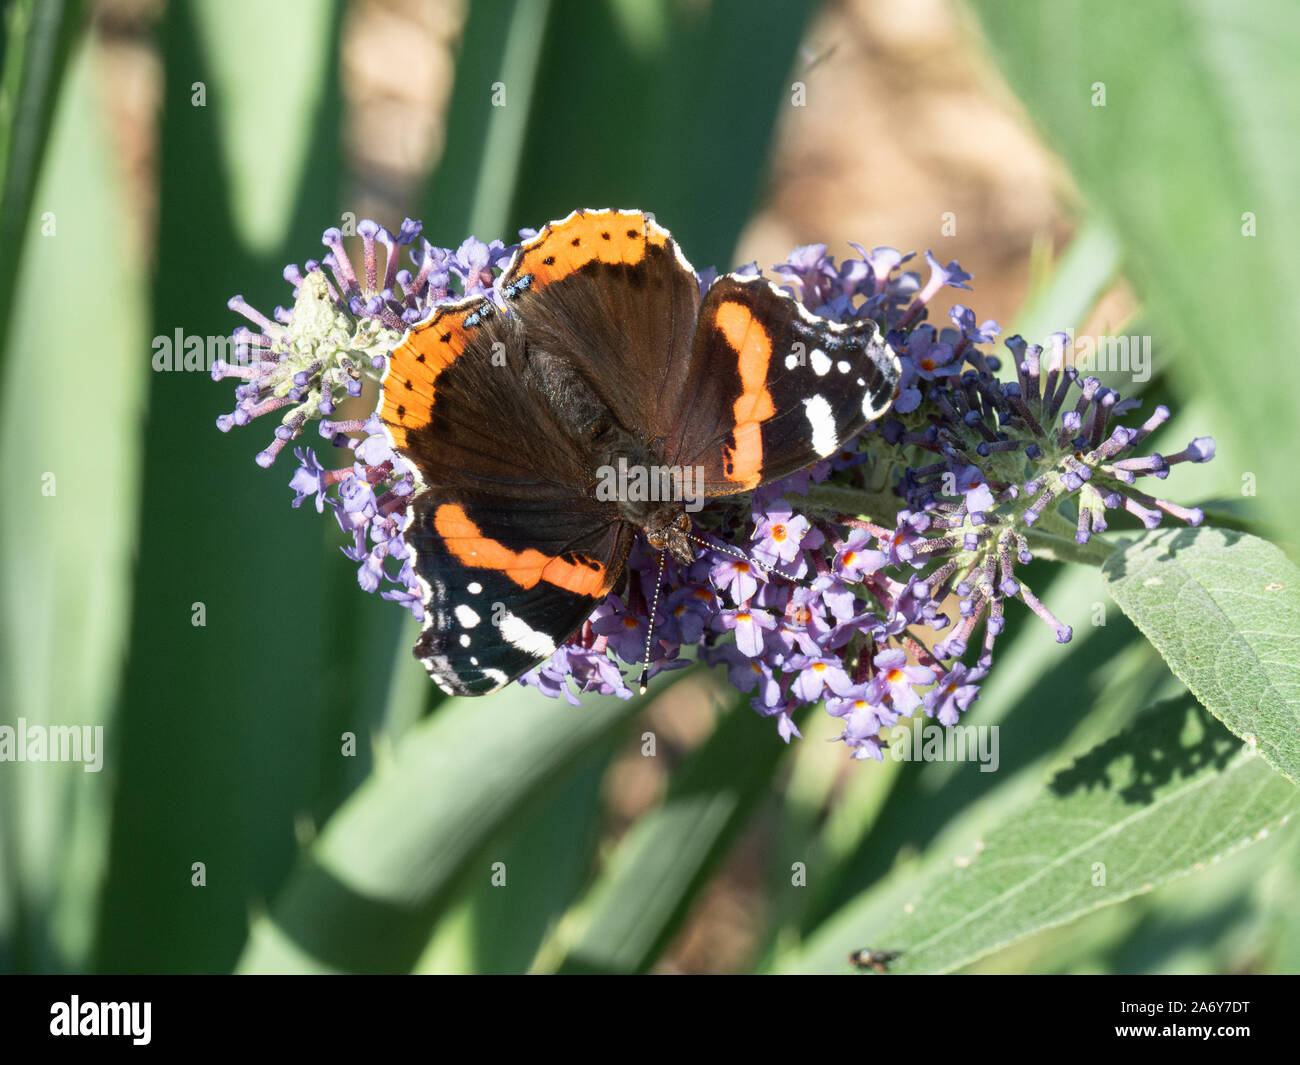 A close up of a red admiral butterfly showing the distinctive wing markings Stock Photo